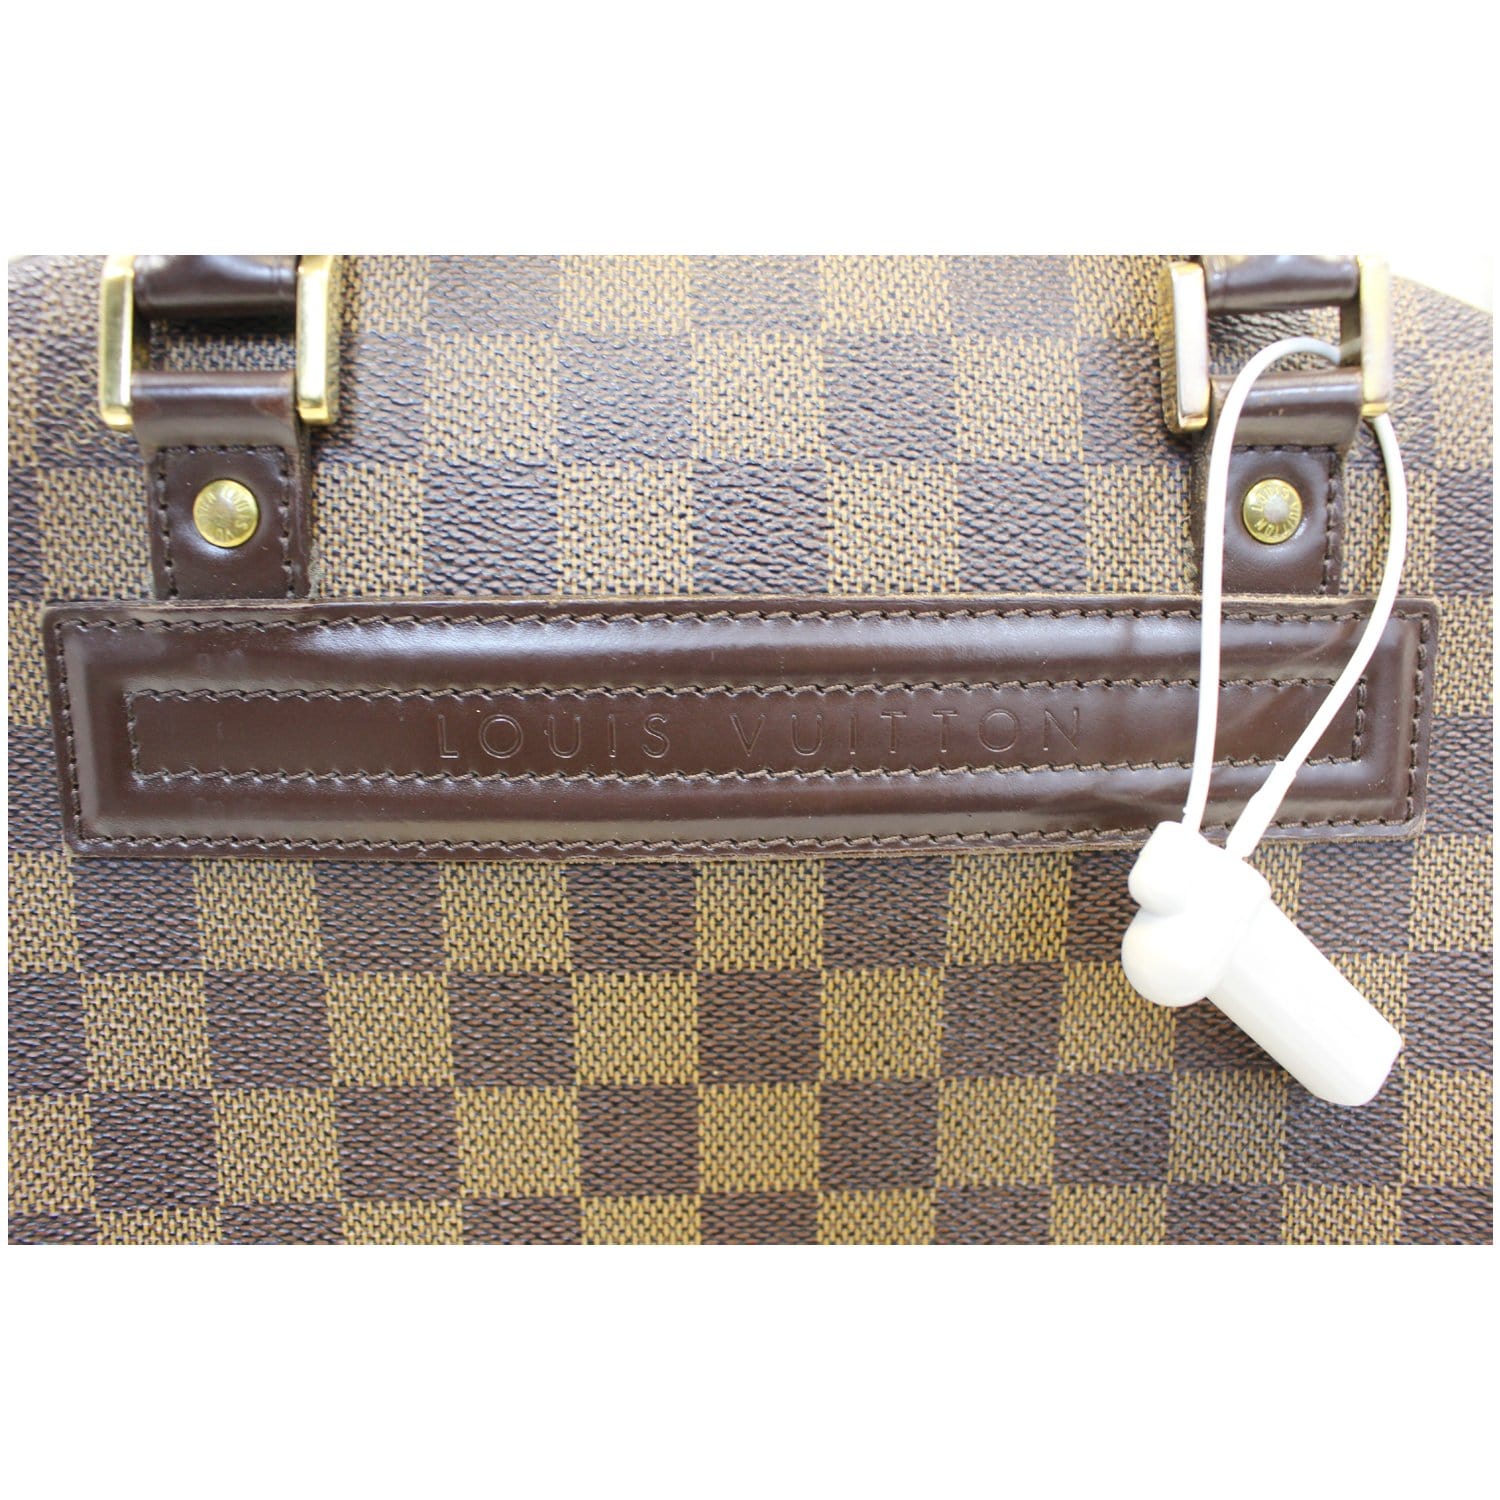 Moving out, Clearance sale! Authentic Designer Brand Louis Vuitton LV Brown  Damier Ebene Nolita Leather Weekend Travel Luggage Shoulder Sling Tote Bag,  Hobbies & Toys, Travel, Luggage on Carousell